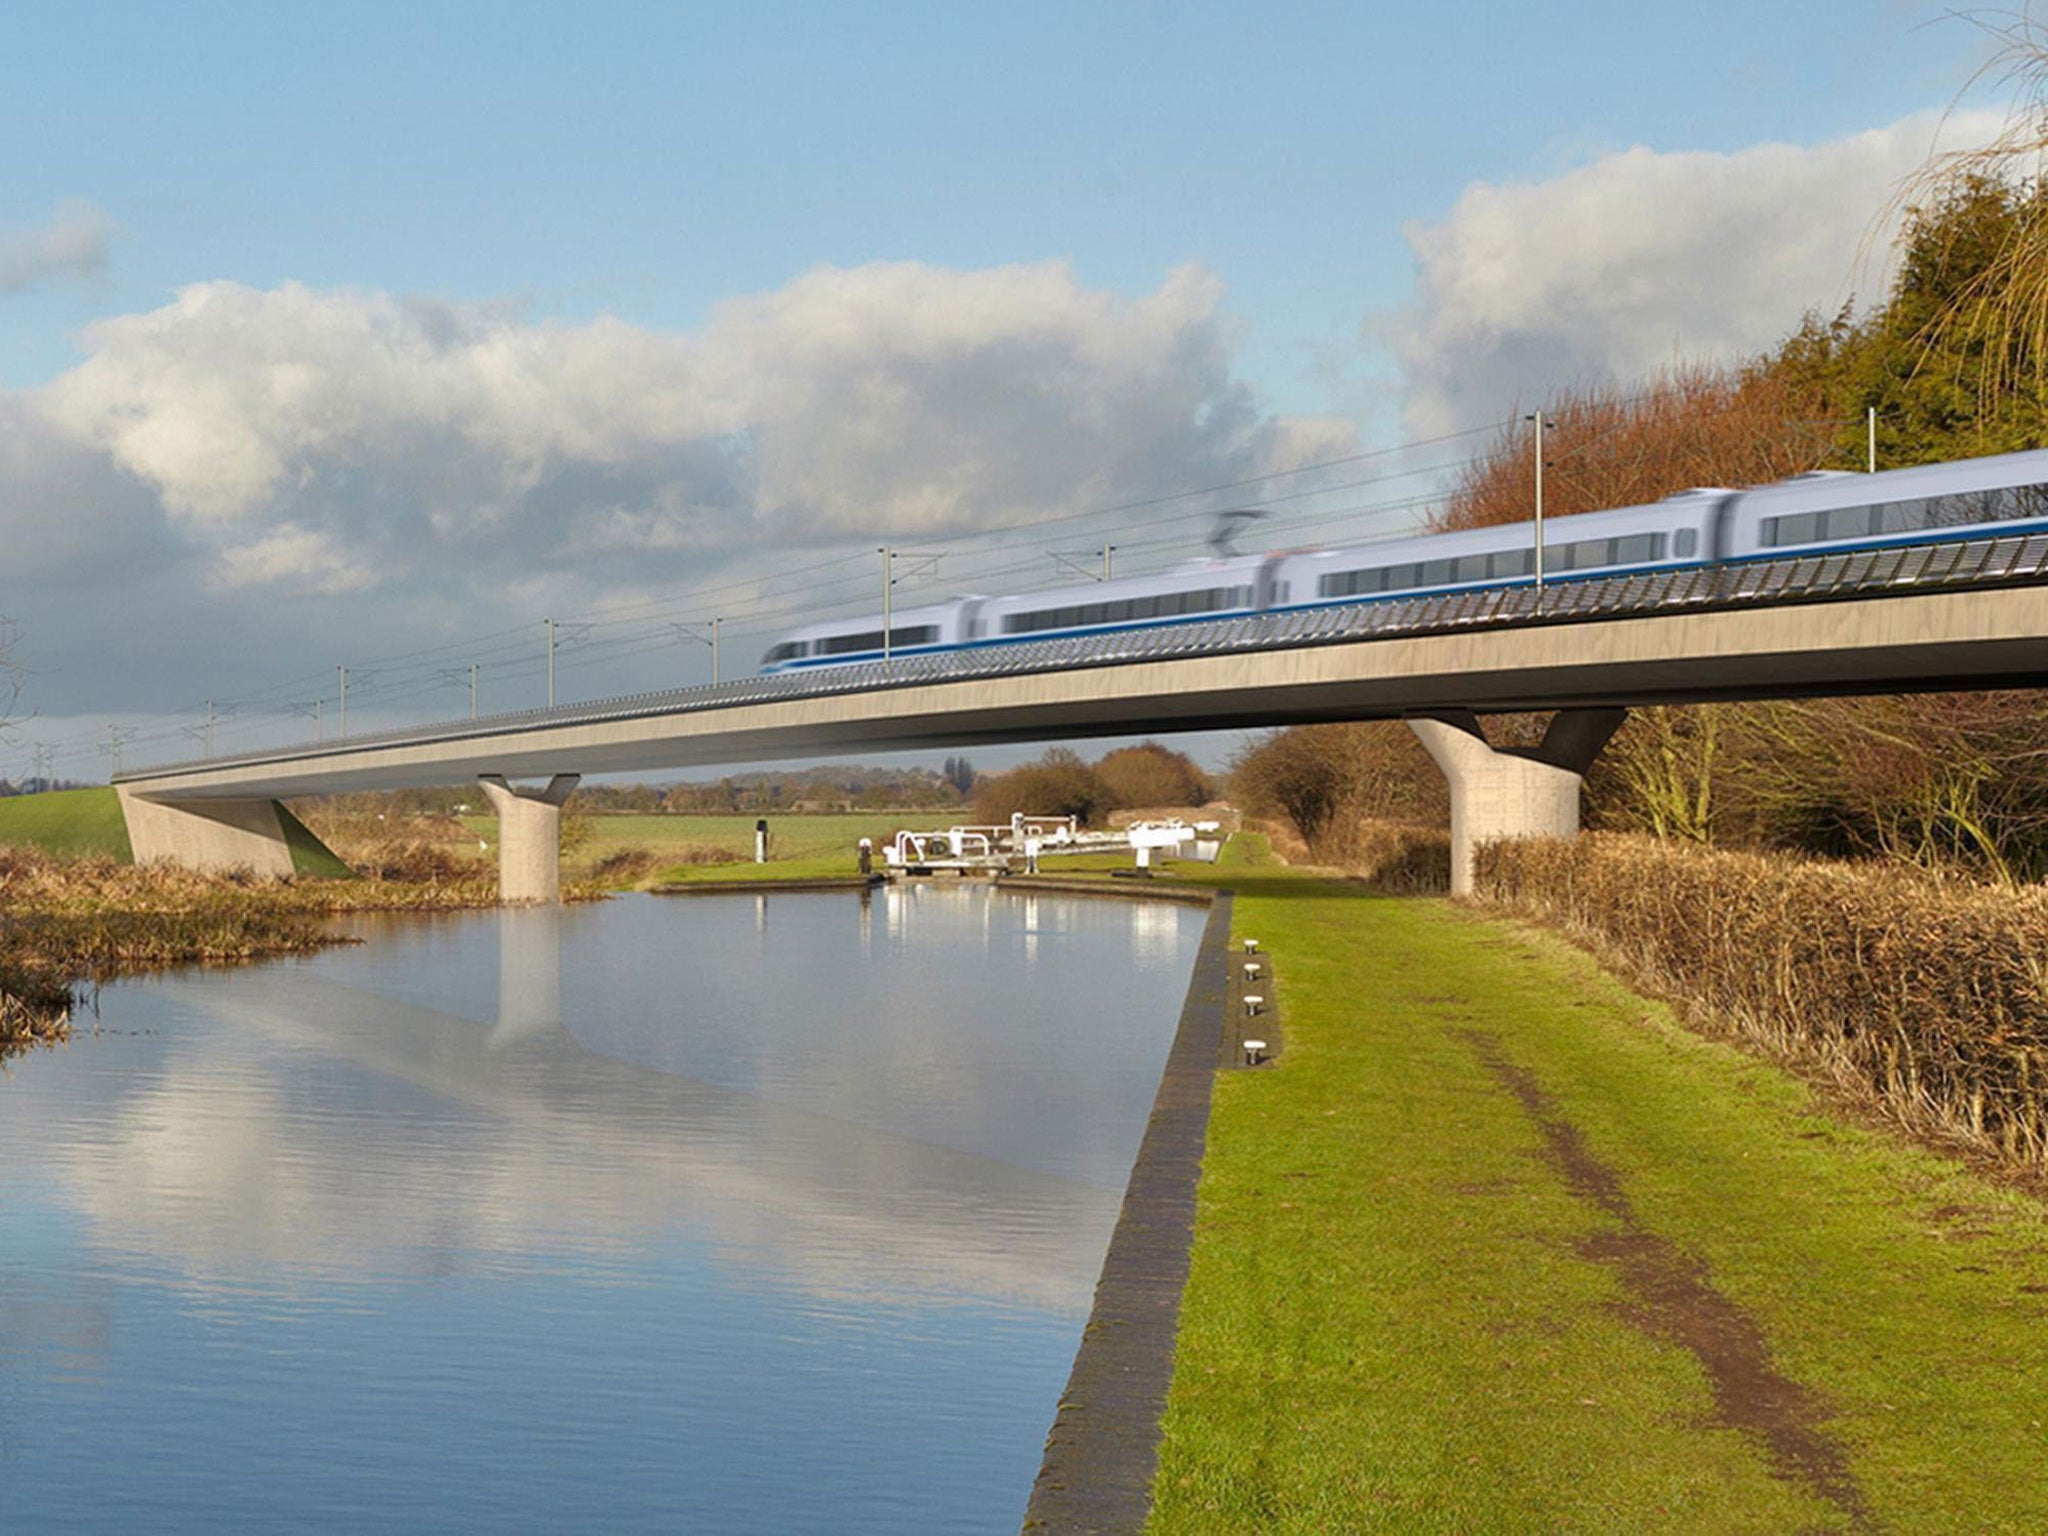 Sir David Higgins’ report recommends extending phase one of HS2 beyond Birmingham to Crewe